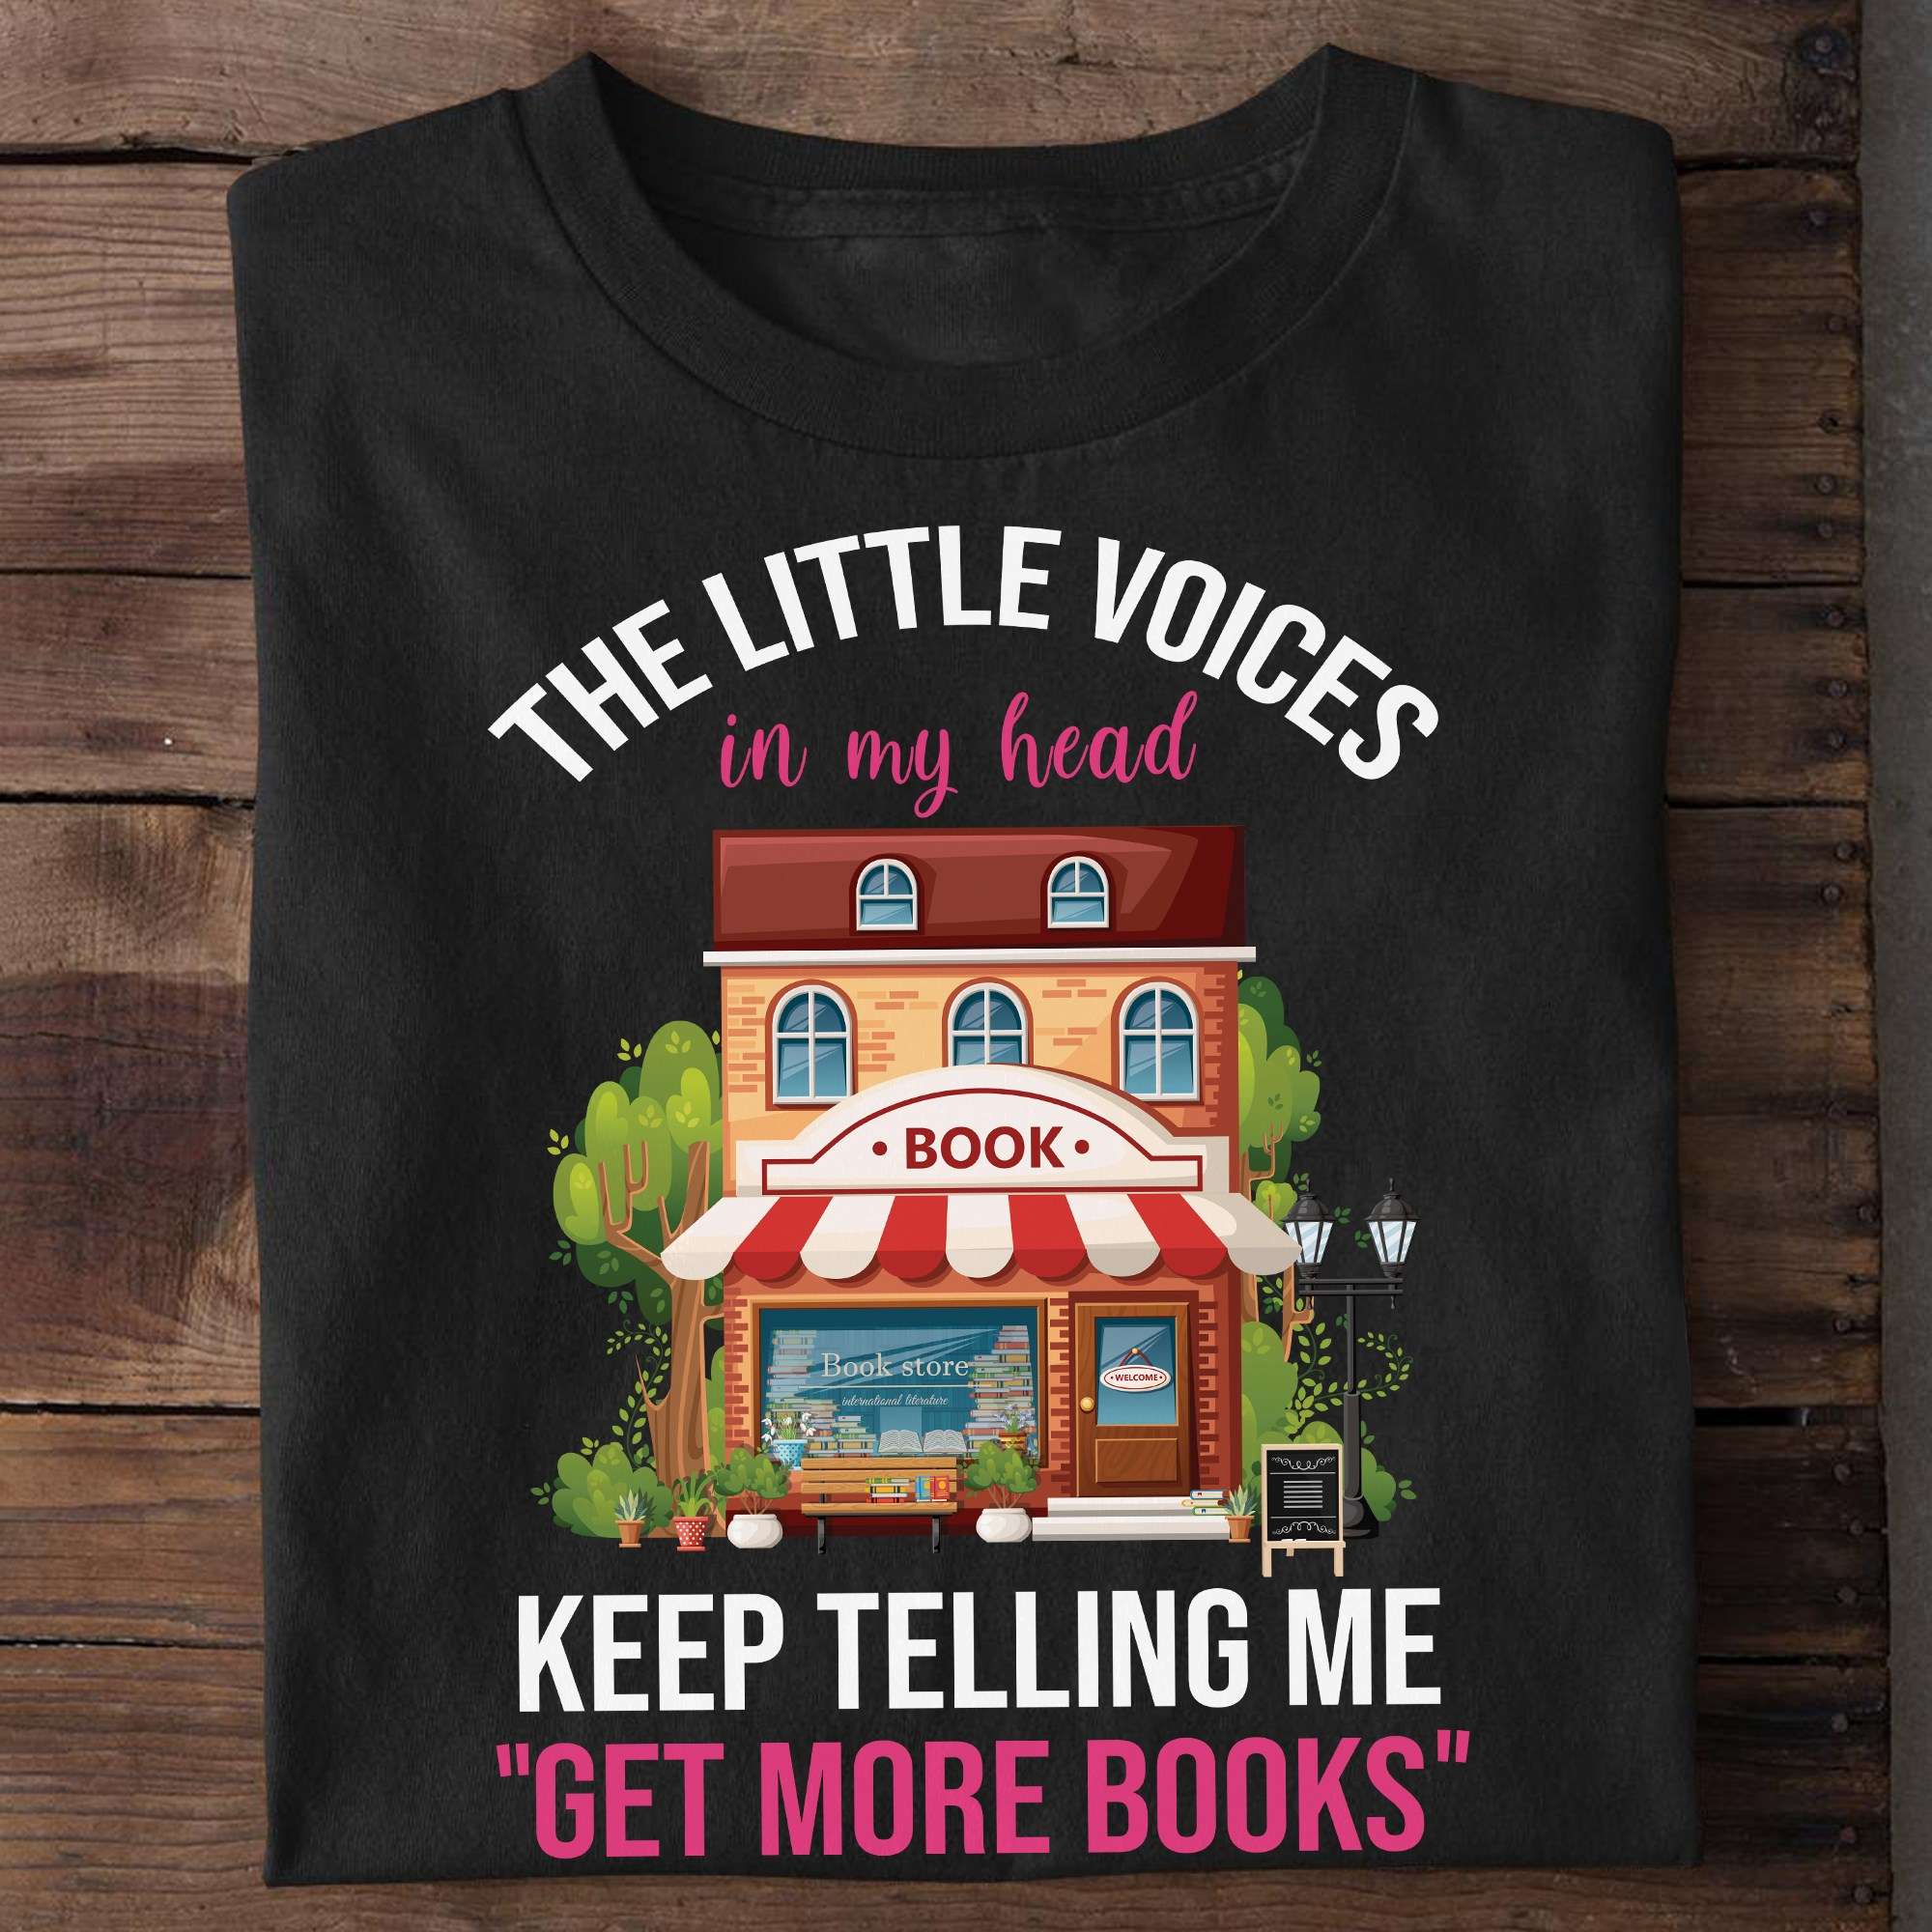 The little voices in my head keep telling me get more books - Book store, love reading books